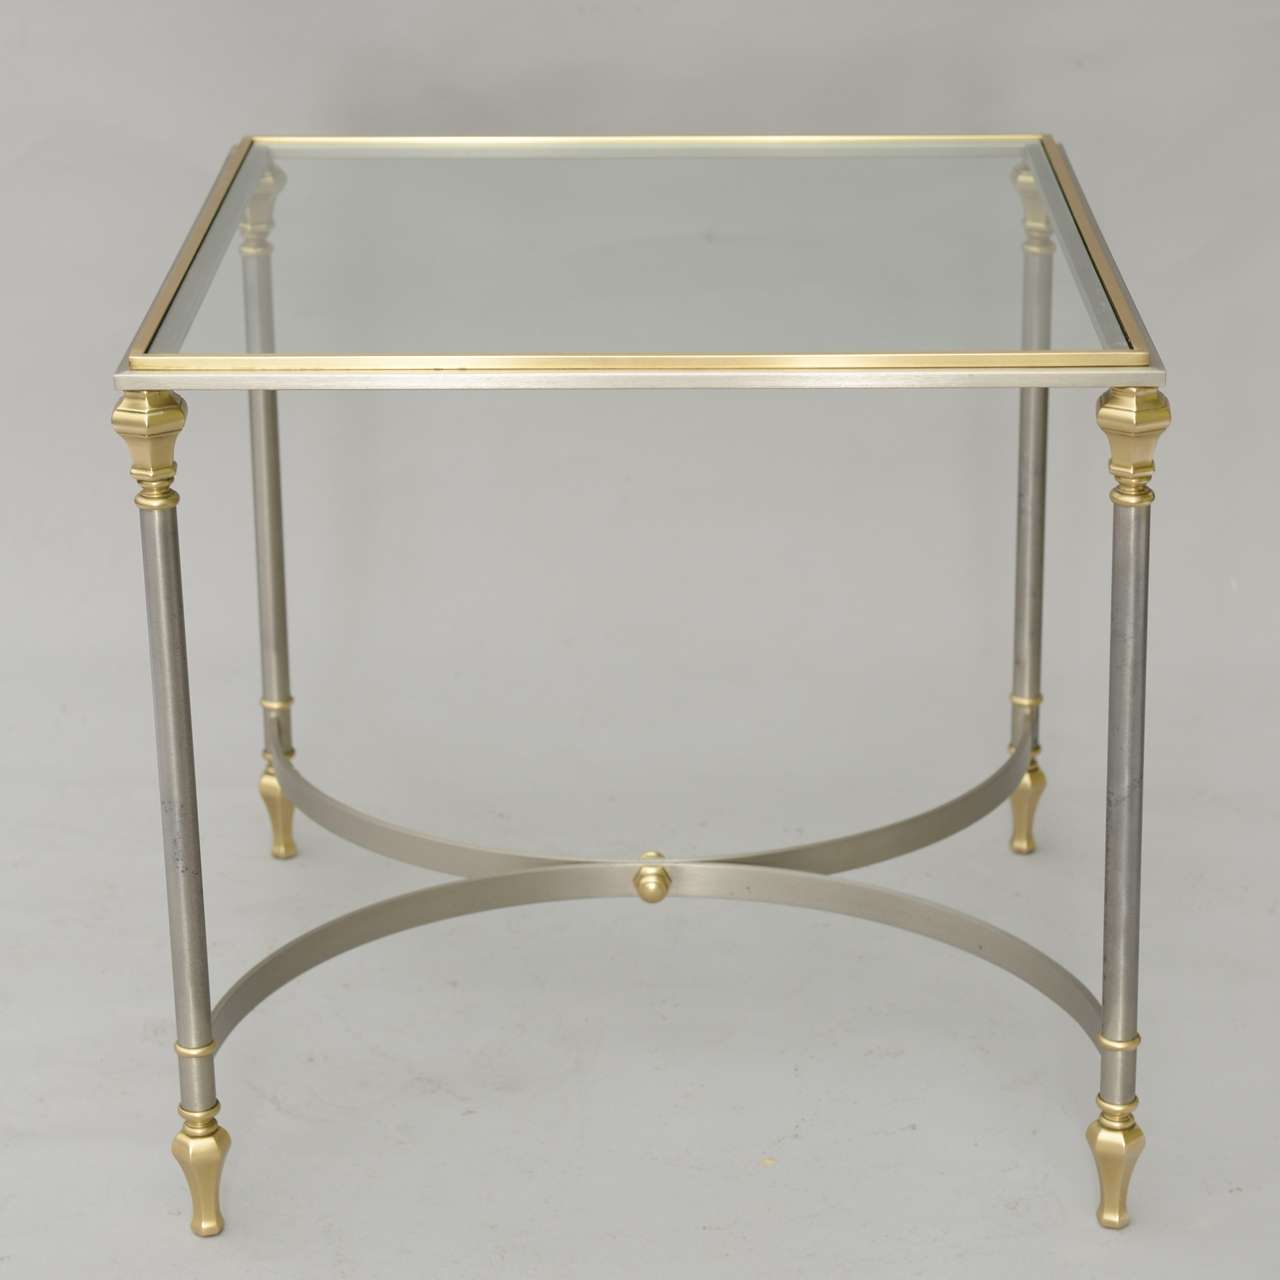 Accent table, of polished steel trimmed in brass, inset with glass top and raised on round legs, joined by bowed stretcher.

Stock ID: D3297